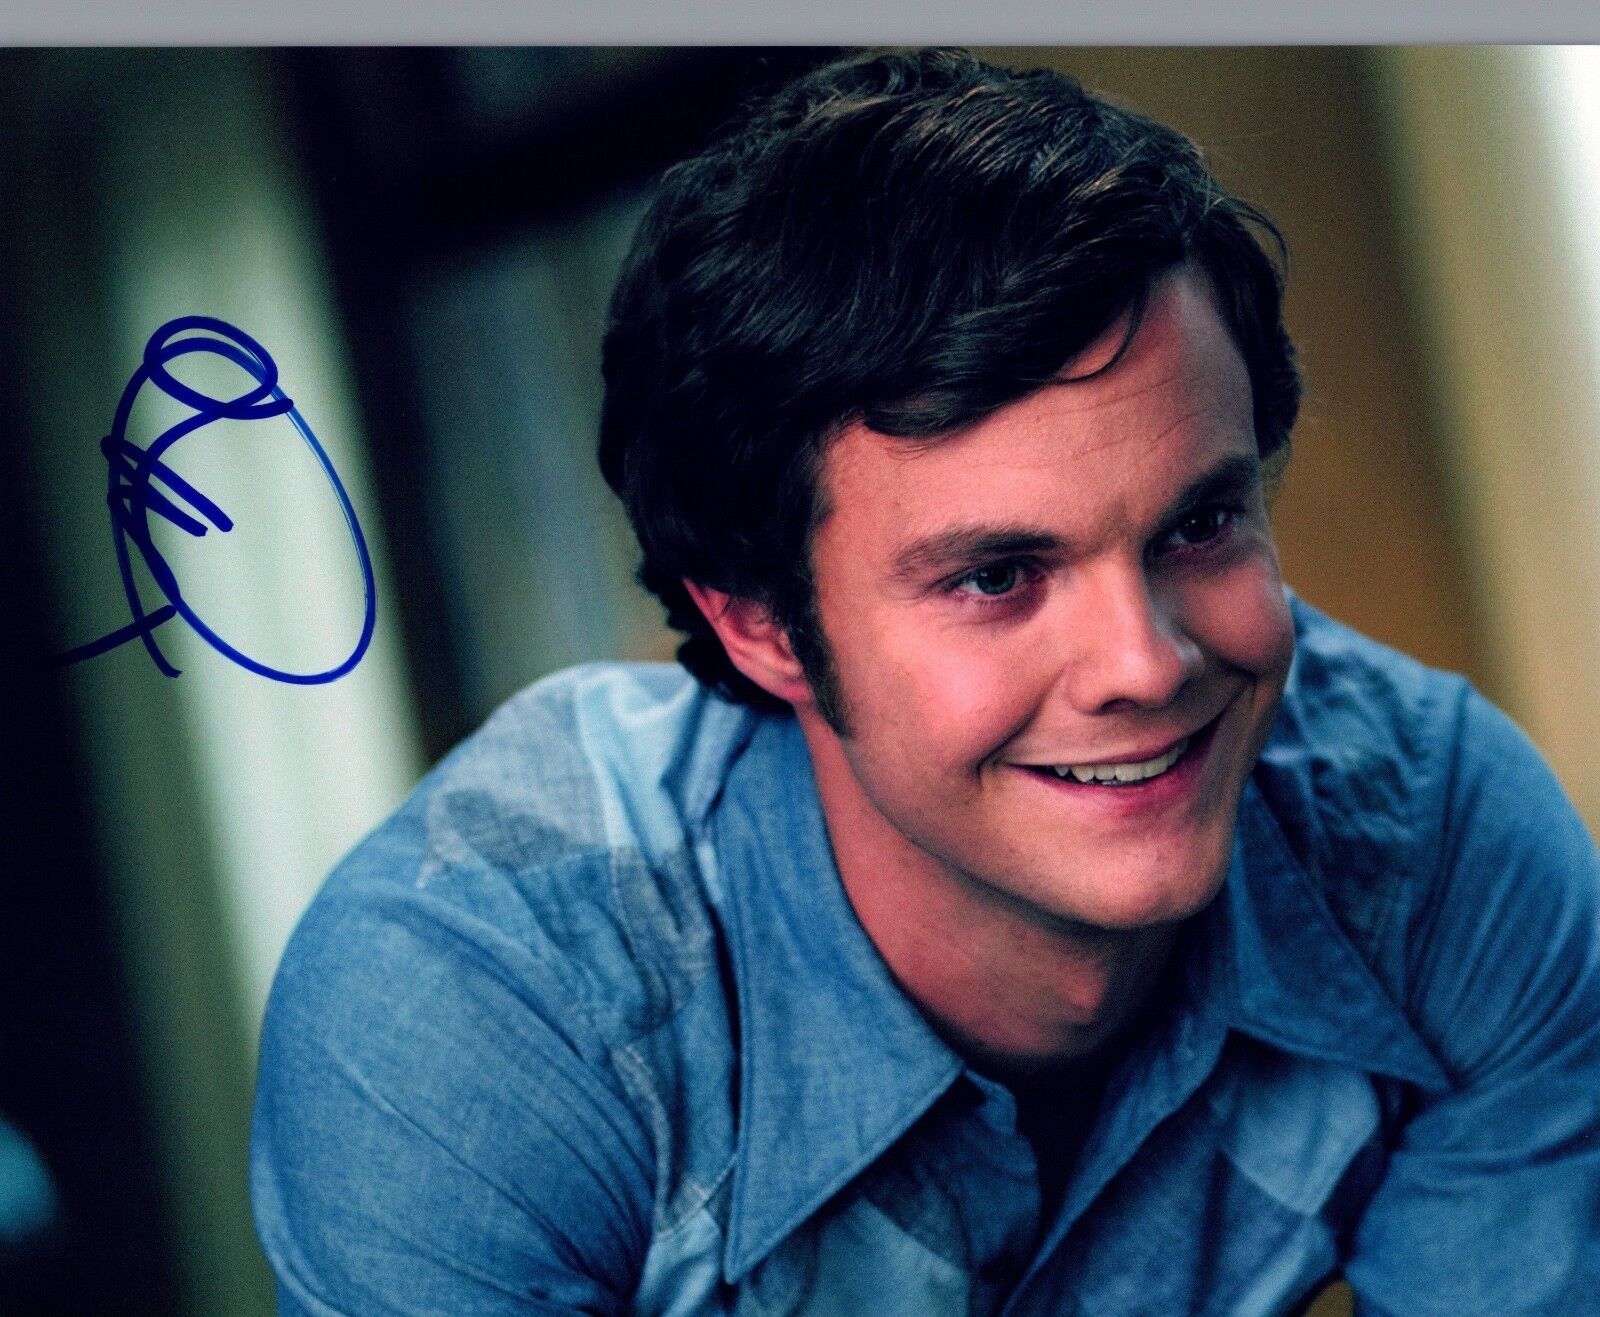 Jack Quaid Signed Autographed 8x10 Photo Poster painting HUNGER GAMES Actor COA AB